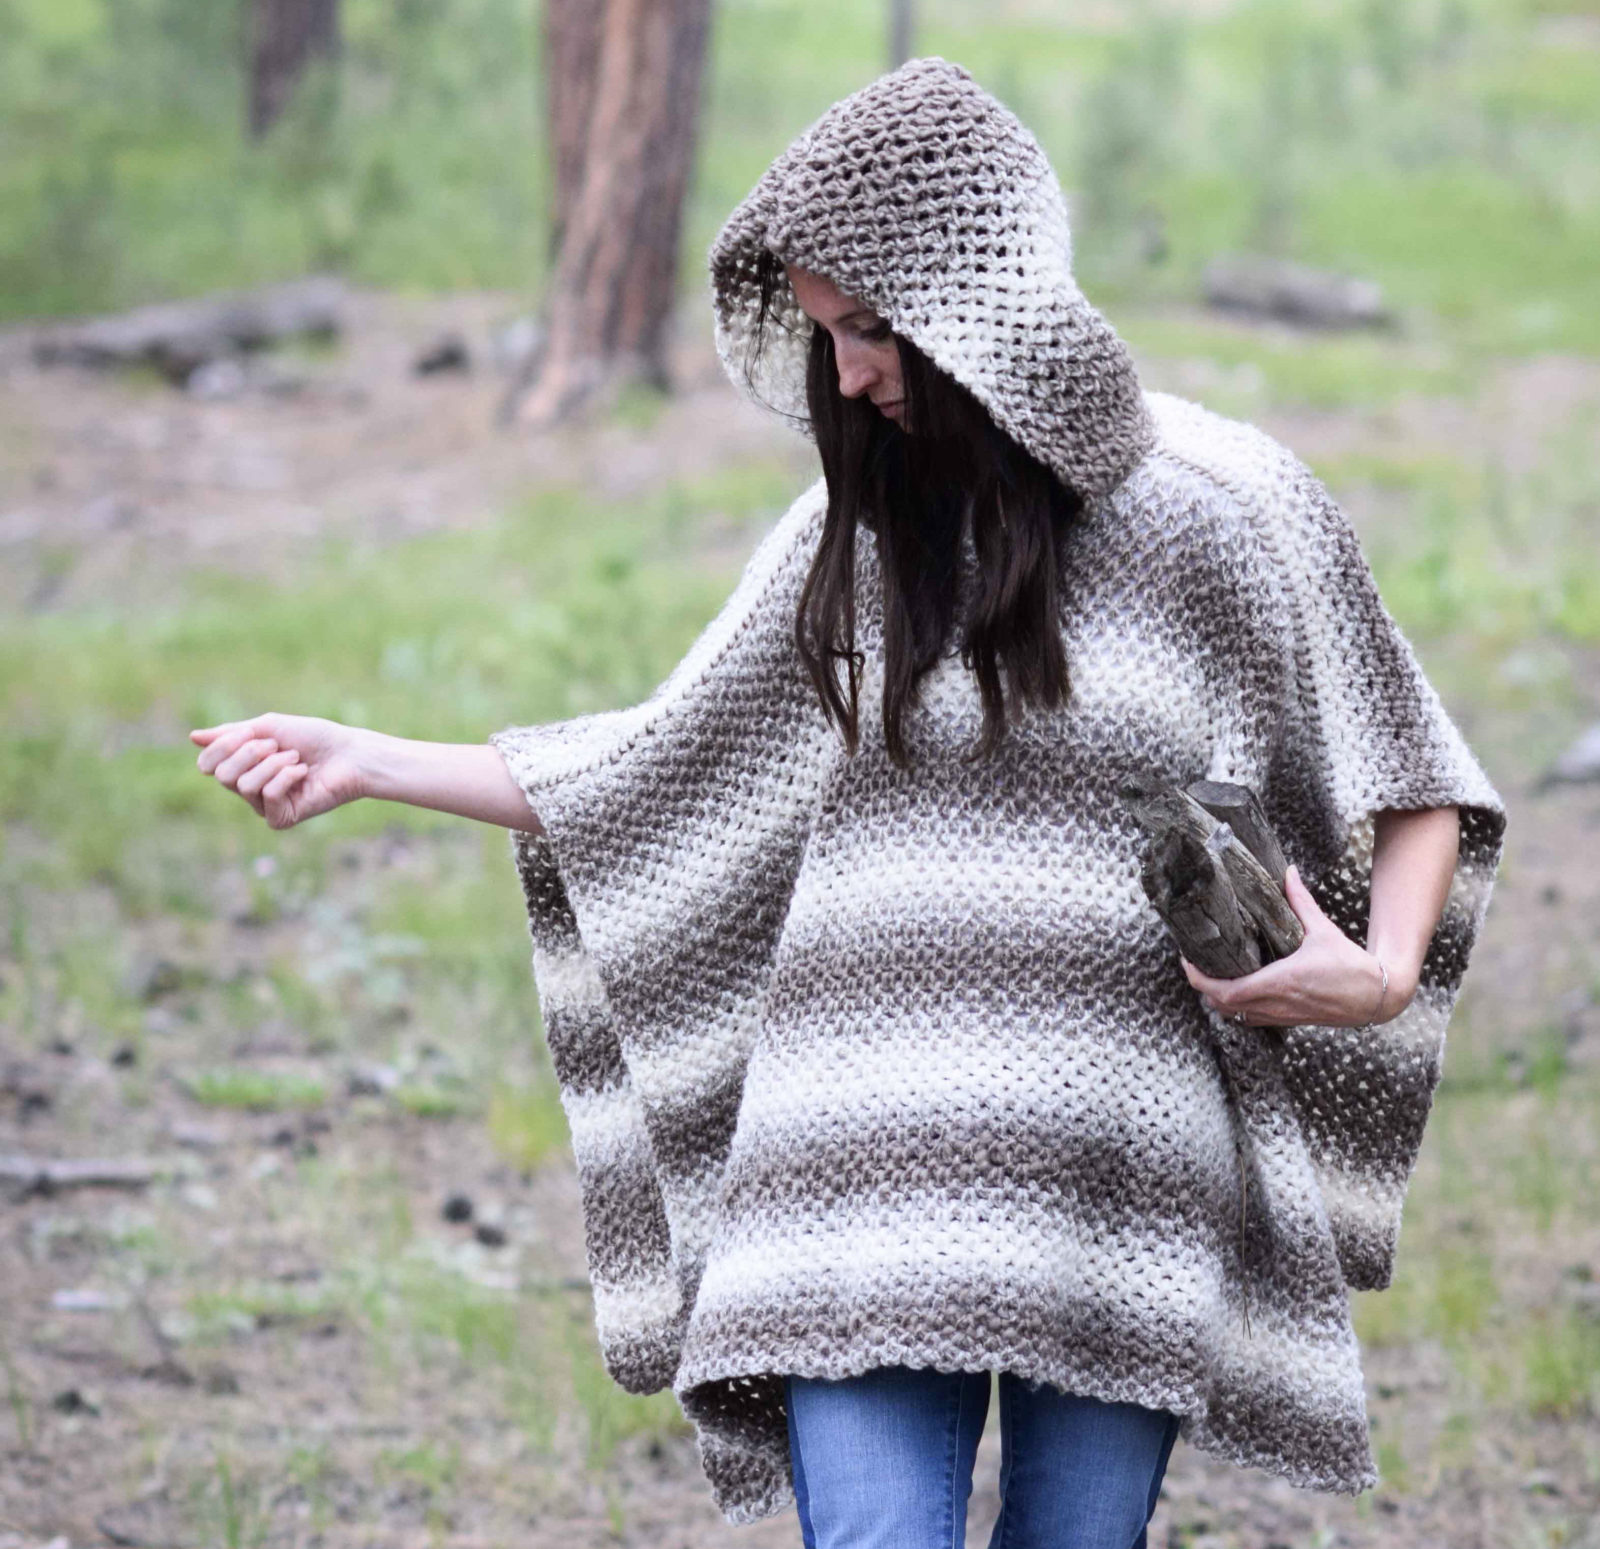 Driftwood Oversized Crochet Hooded Poncho Pattern – Mama In A Stitch